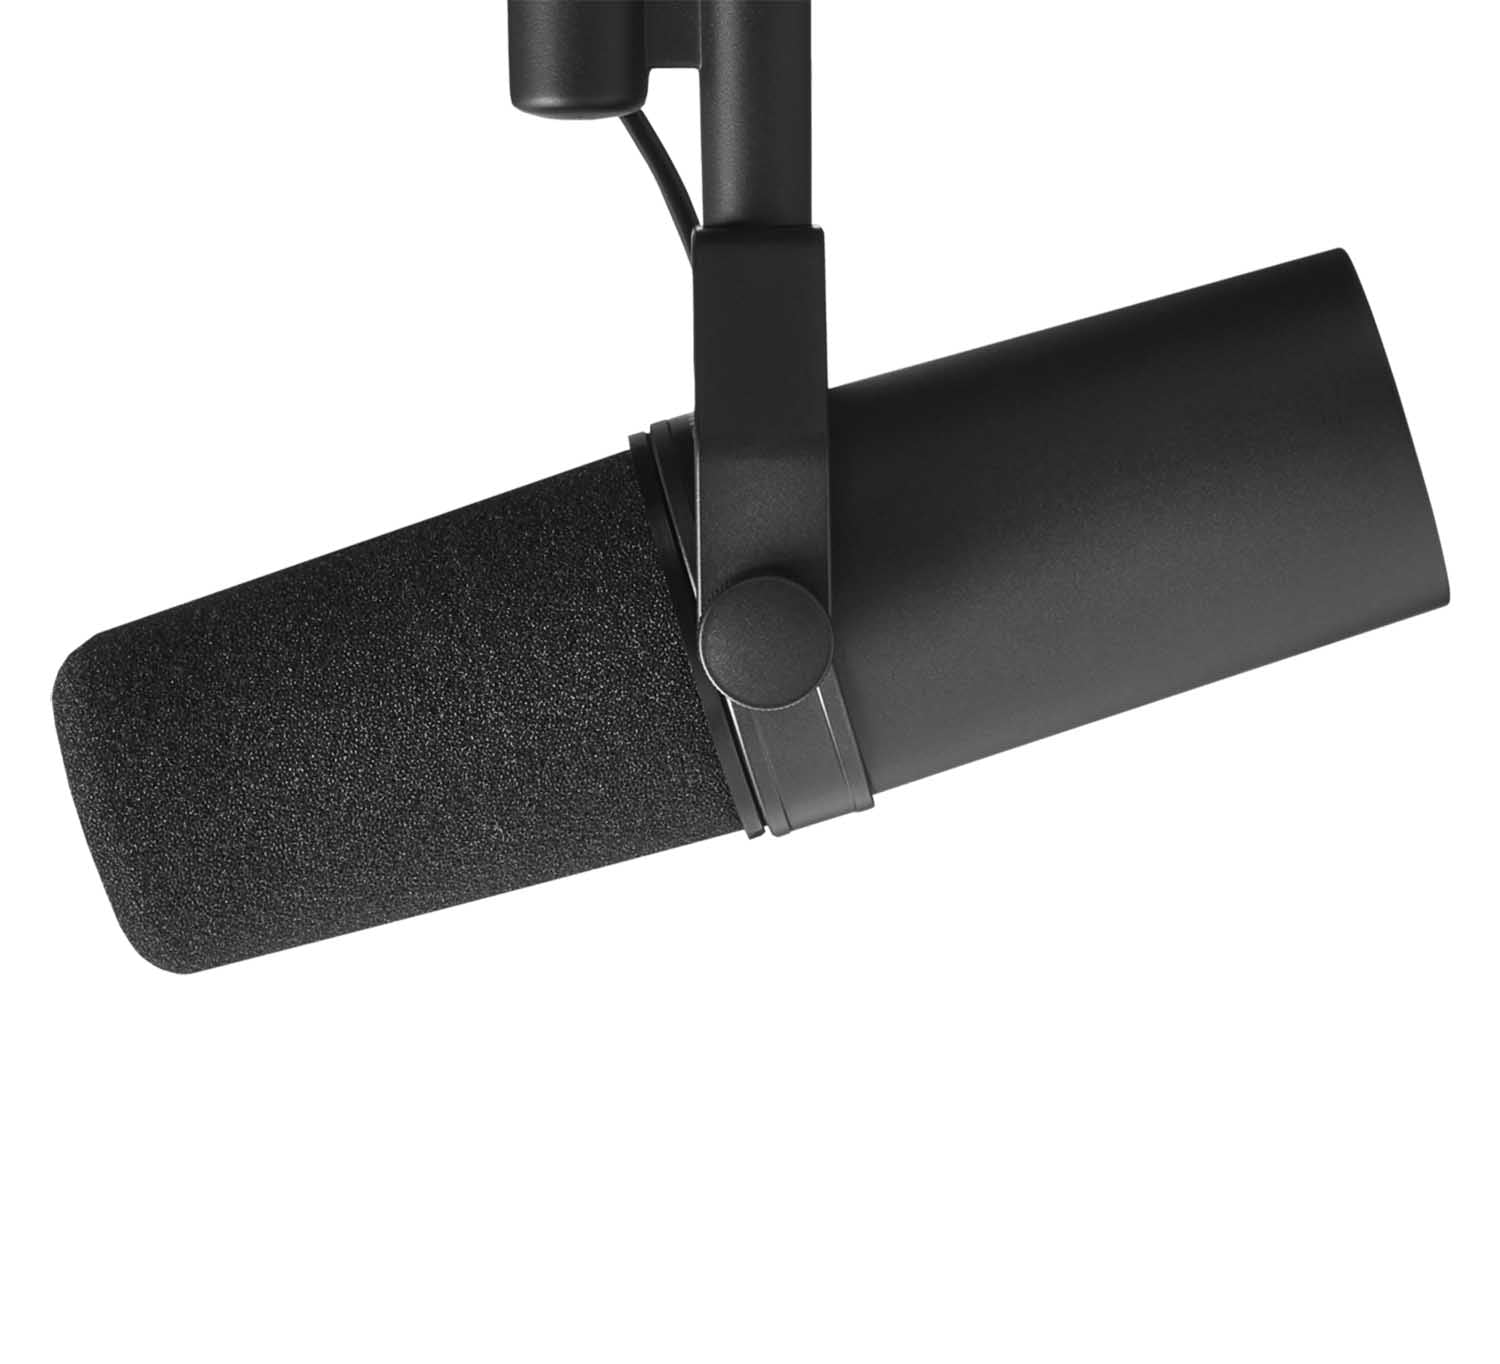 Pro Podcast Package Shure SM7B with Gator Stand - GFWMICBCBM4000 Podcast Setup Shure